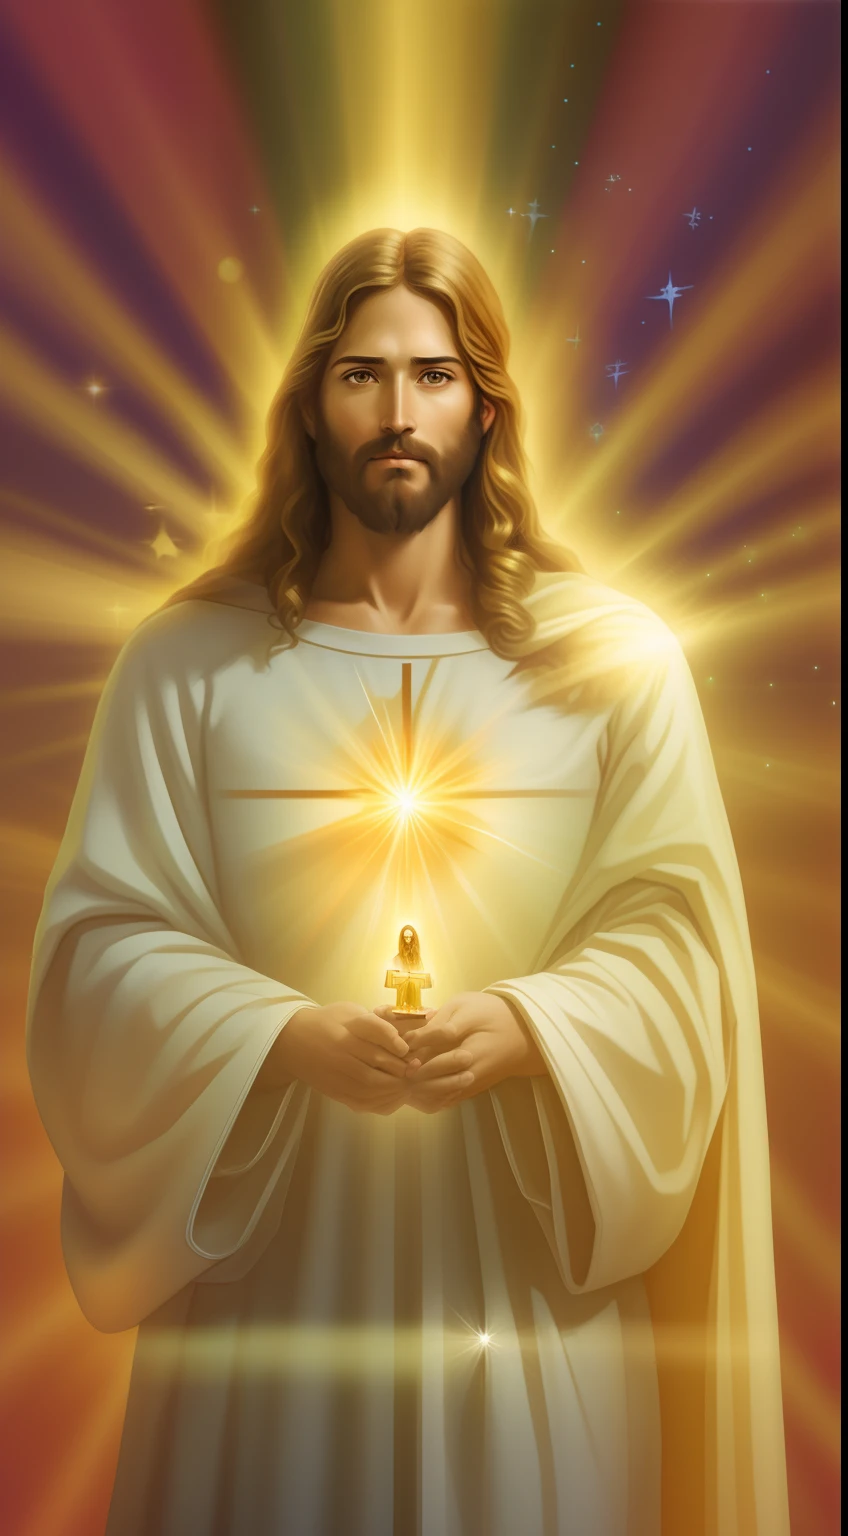 jesus holding a star in his hands, glowing holy aura, holy sacred light rays, jesus christ, glowing god rays, bright light masterpiece, light of god, holy rays of spiritual light, divine light, tron legacy jesus christ, jesus of nazareth, visible holy aura, spiritual light, holy light, portrait of jesus christ, glorious supernatural power, holy energy